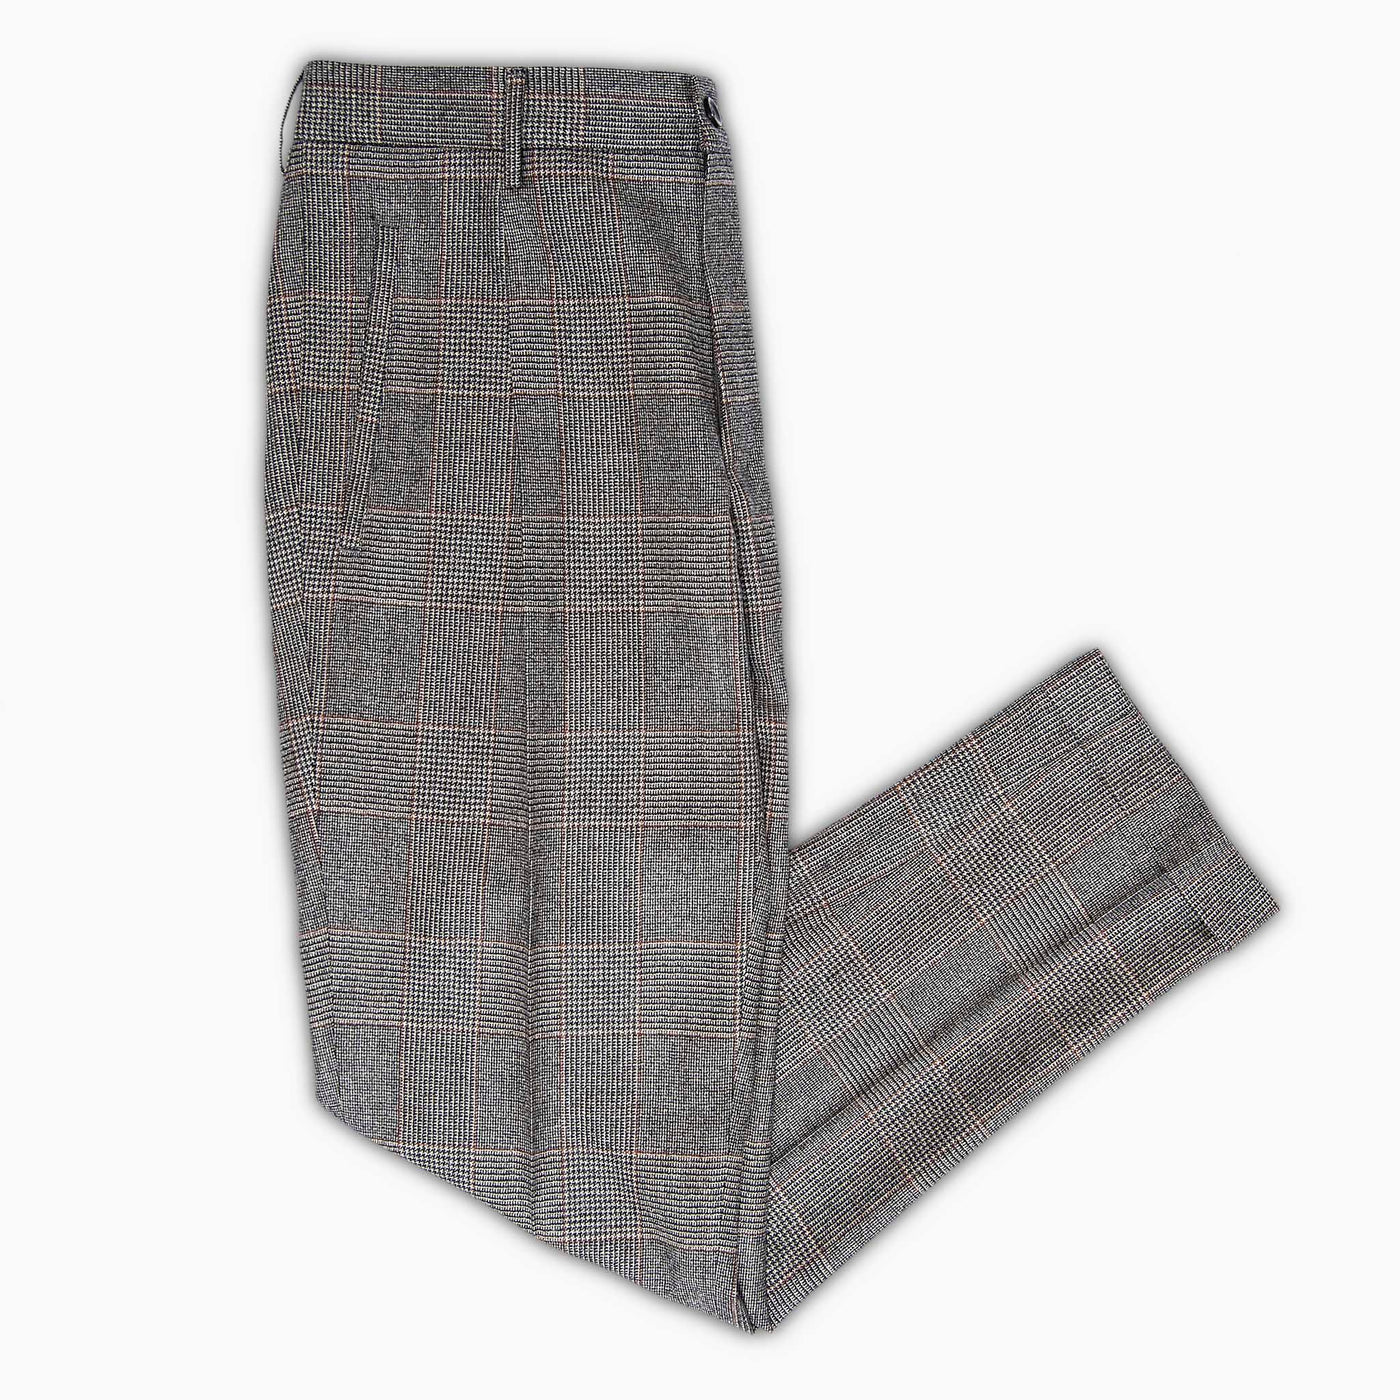 Alain Pleated Chino high wool and cashmere flannel Prince of Wales (anthracite and brown)